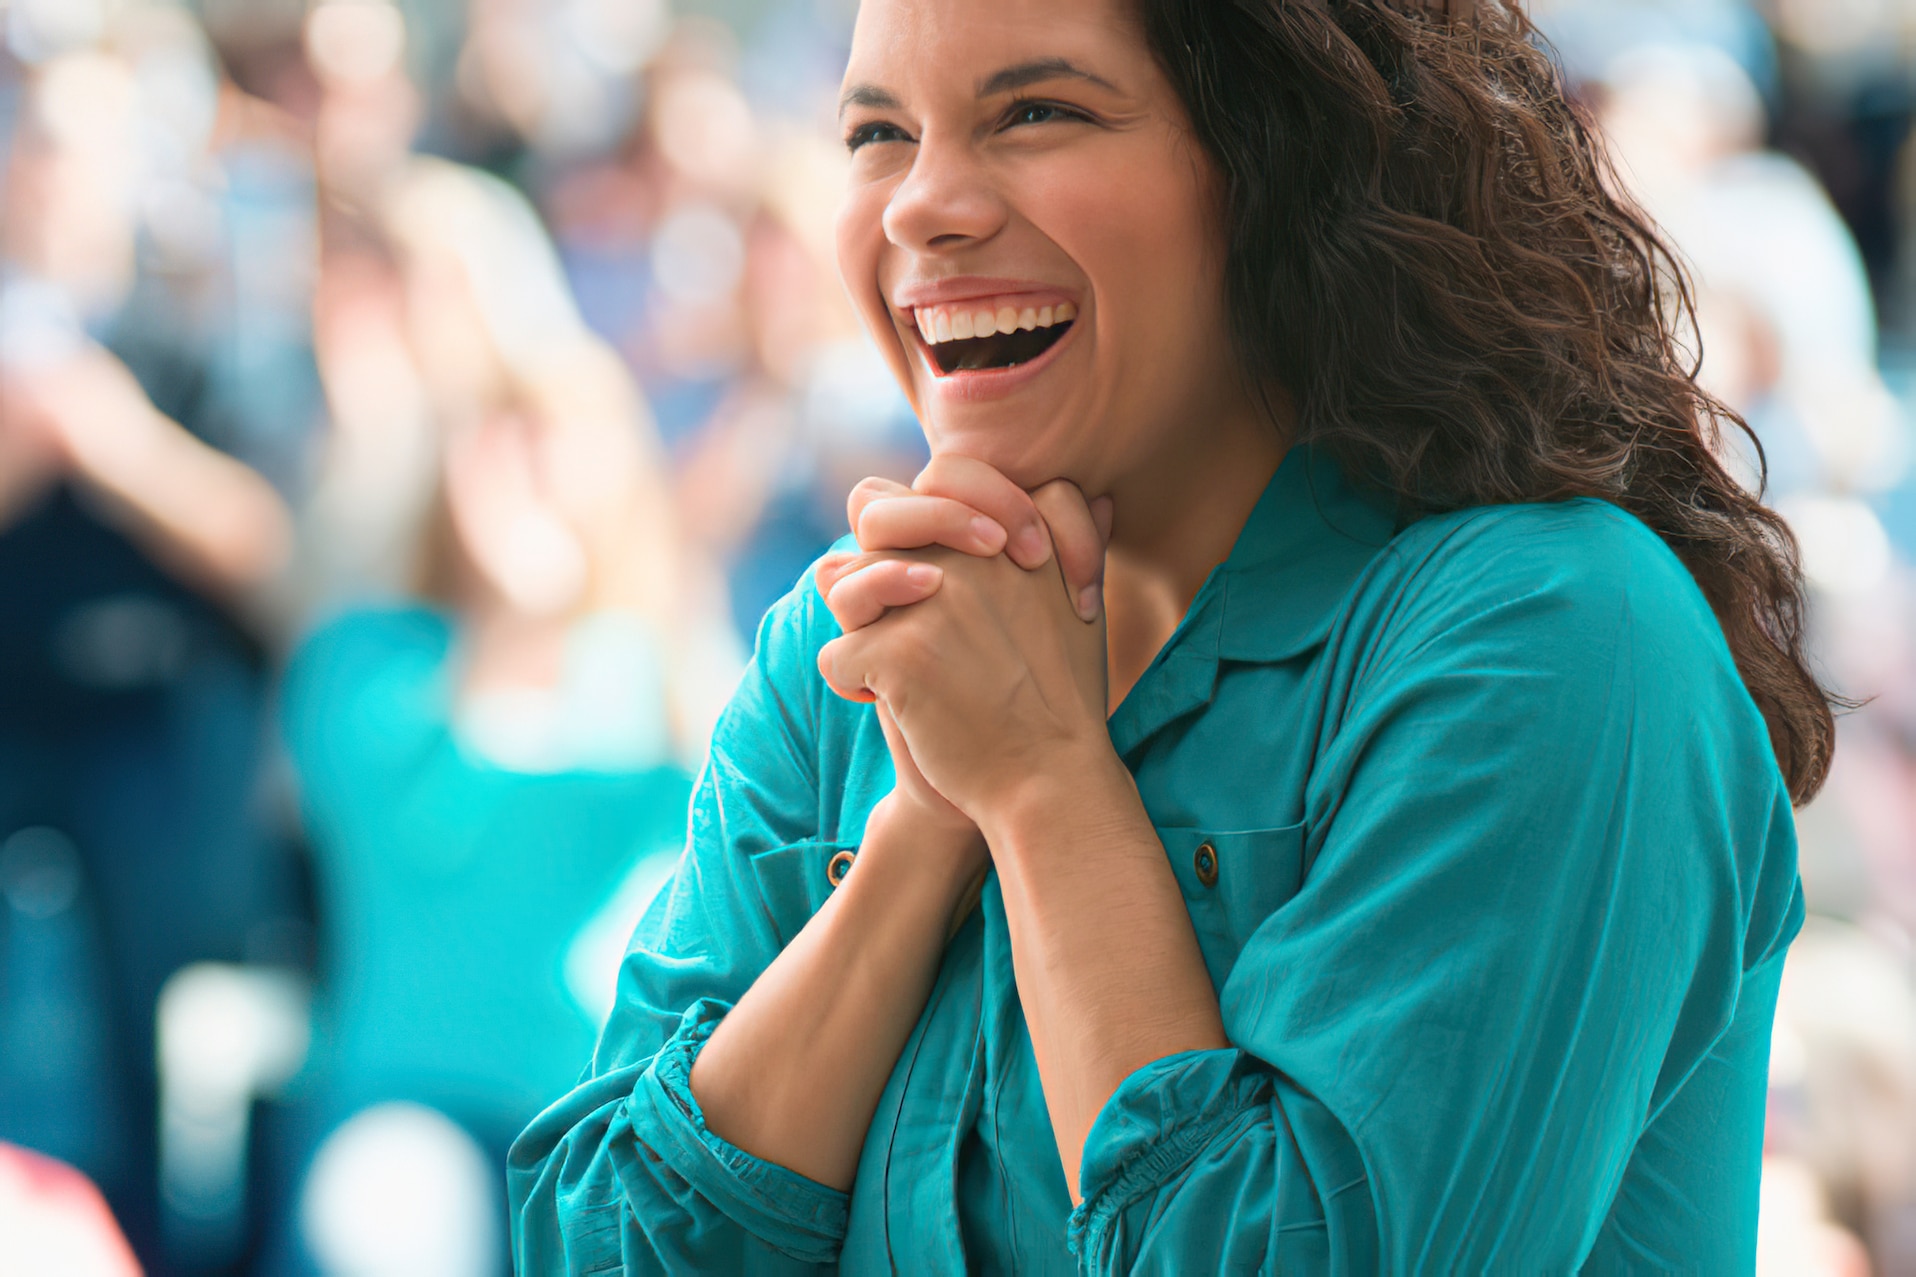 Woman in a teal shirt smiling.